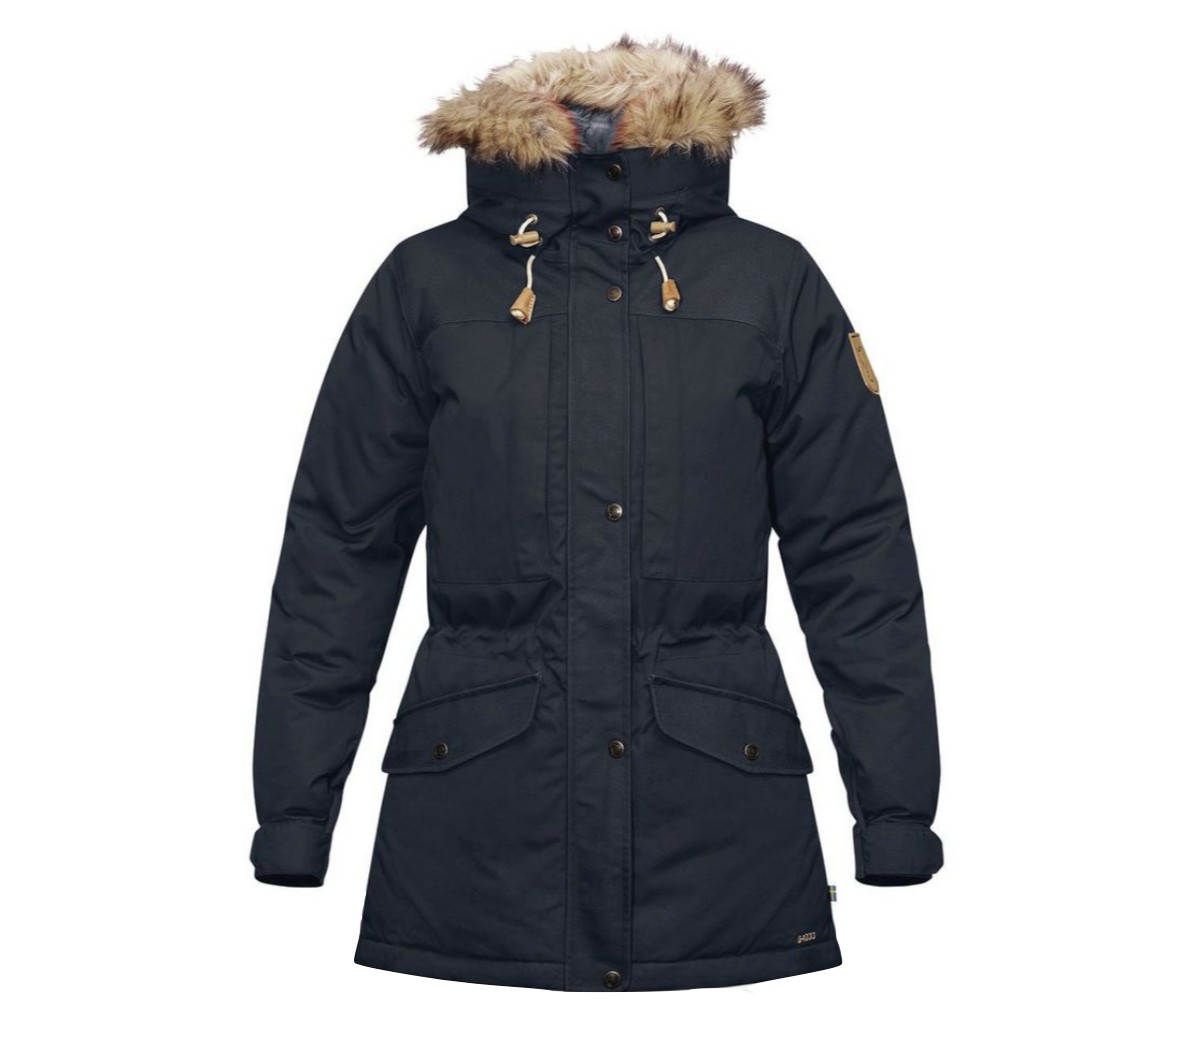 Fjallraven Singi Down - Women's Review | Tested by GearLab